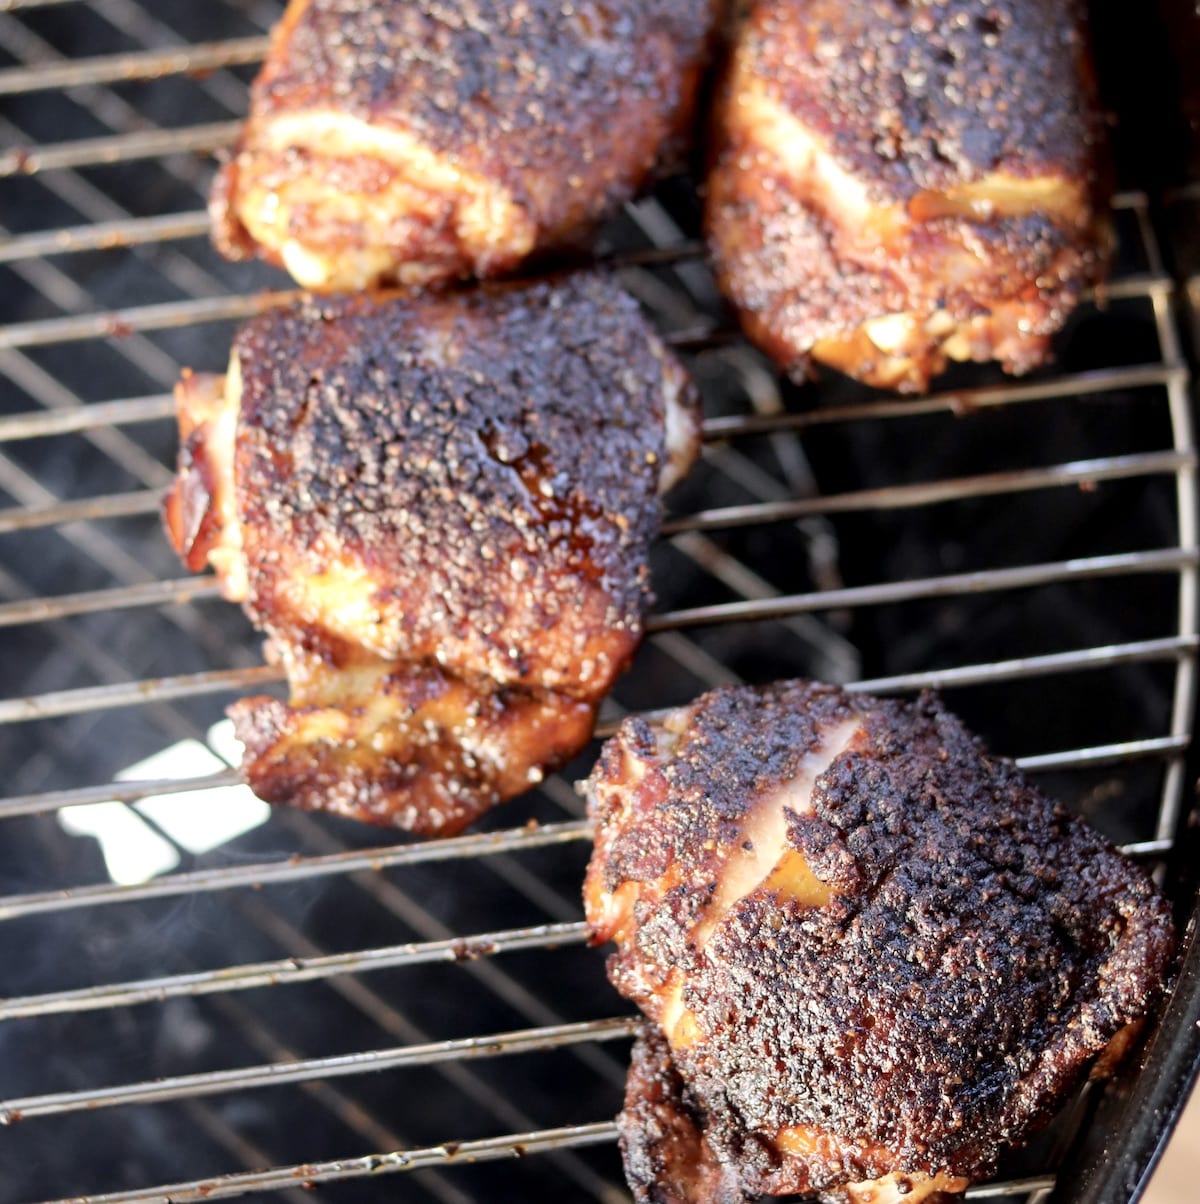 Brown Sugar Smoked Chicken Thighs on the grillBrown Sugar Smoked Chicken Thighs are incredibly delicious and easy to prepare in your own back yard. A quick brine keeps this chicken moist and juicy and the brown sugar and garlic rub adds amazing flavor to the smoked chicken. 